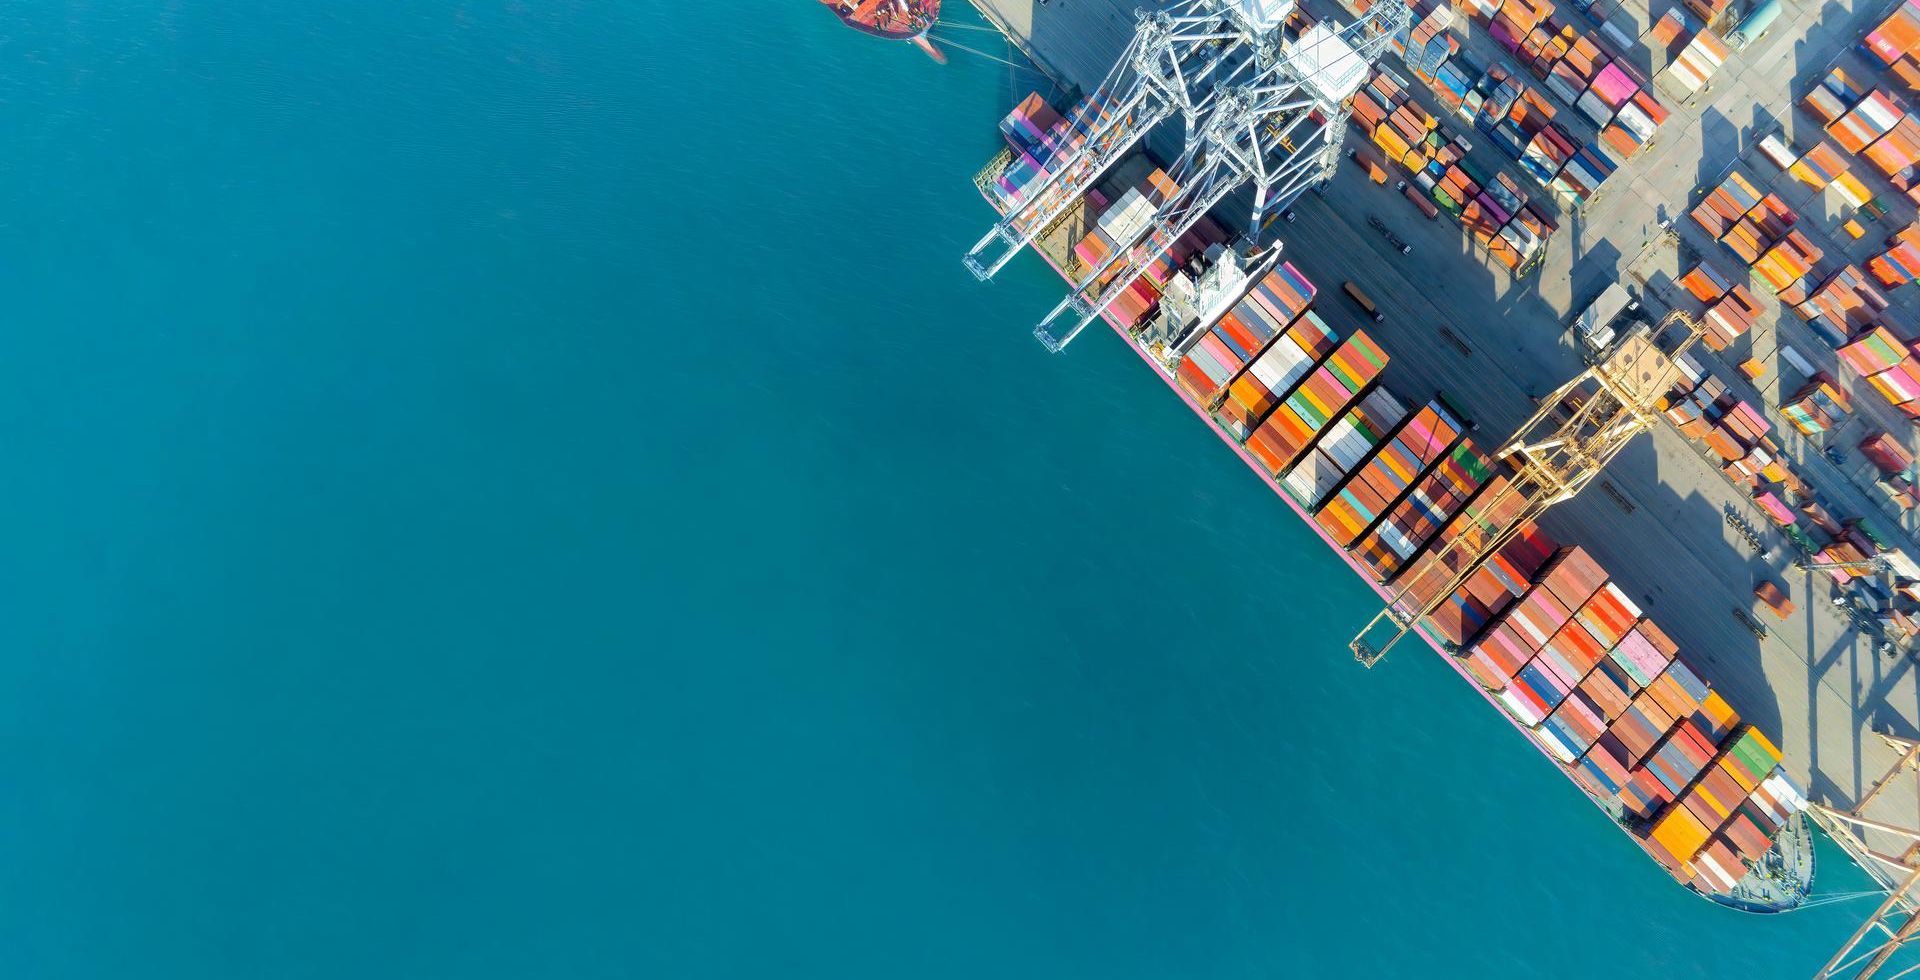 A bird's eye view of a freighter fully loaded with containers, blue sea and container harbour